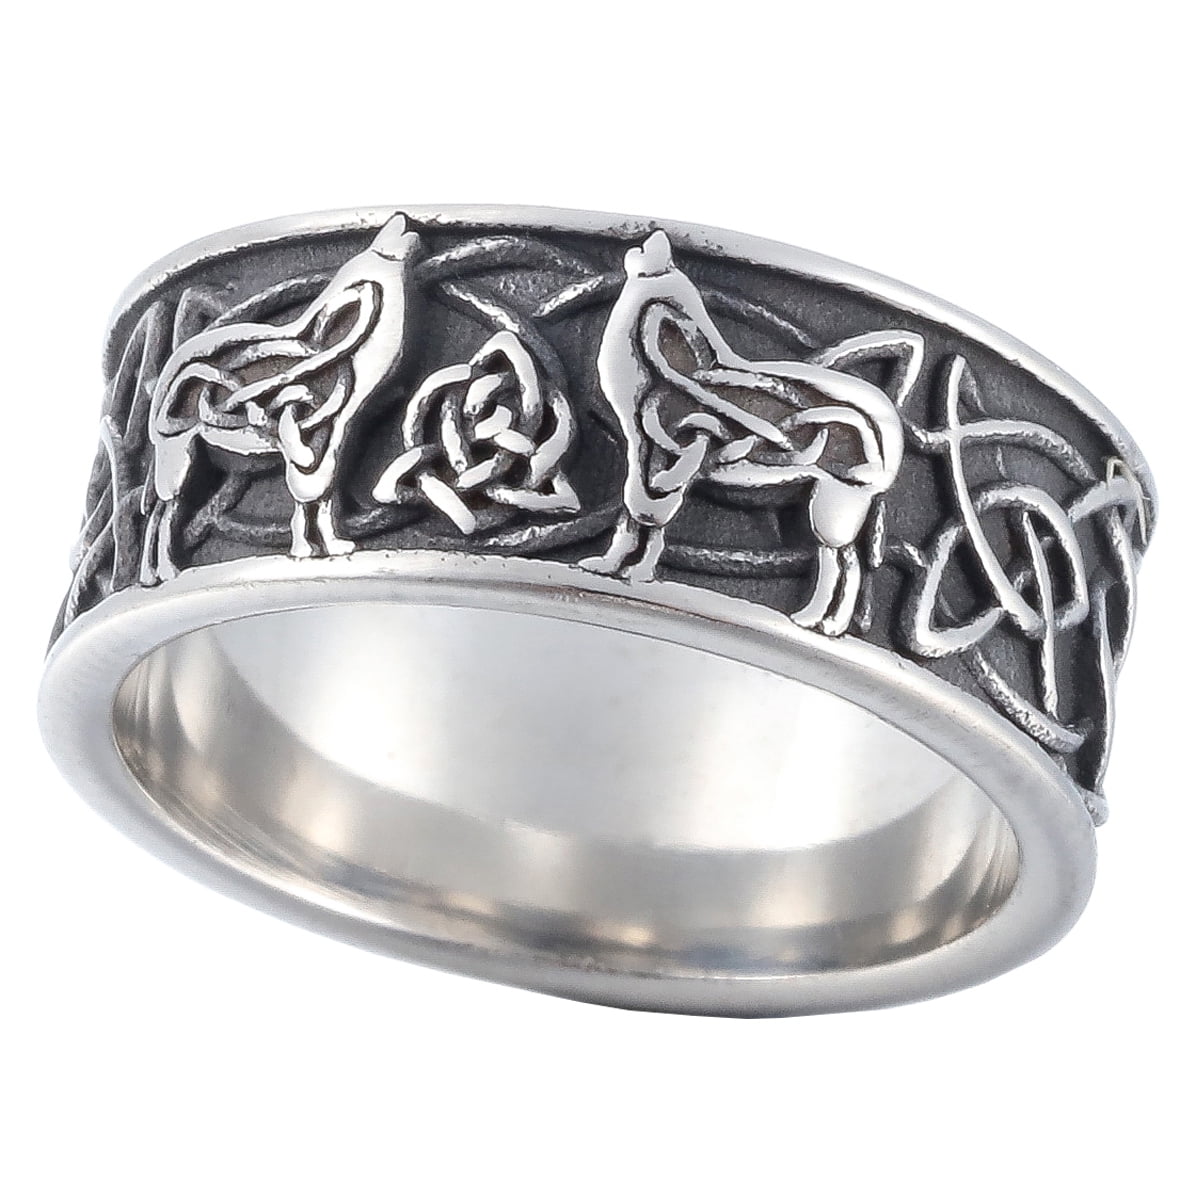 ZMY Home Rings Stainless Steel Jewelry Viking Norse Celtic Knot Rune Fenrir Wolf Rings 7 e4bbc215 5ed0 49b5 8254 9c3673d48708.10112289512c1038fed5bc071a37ba70